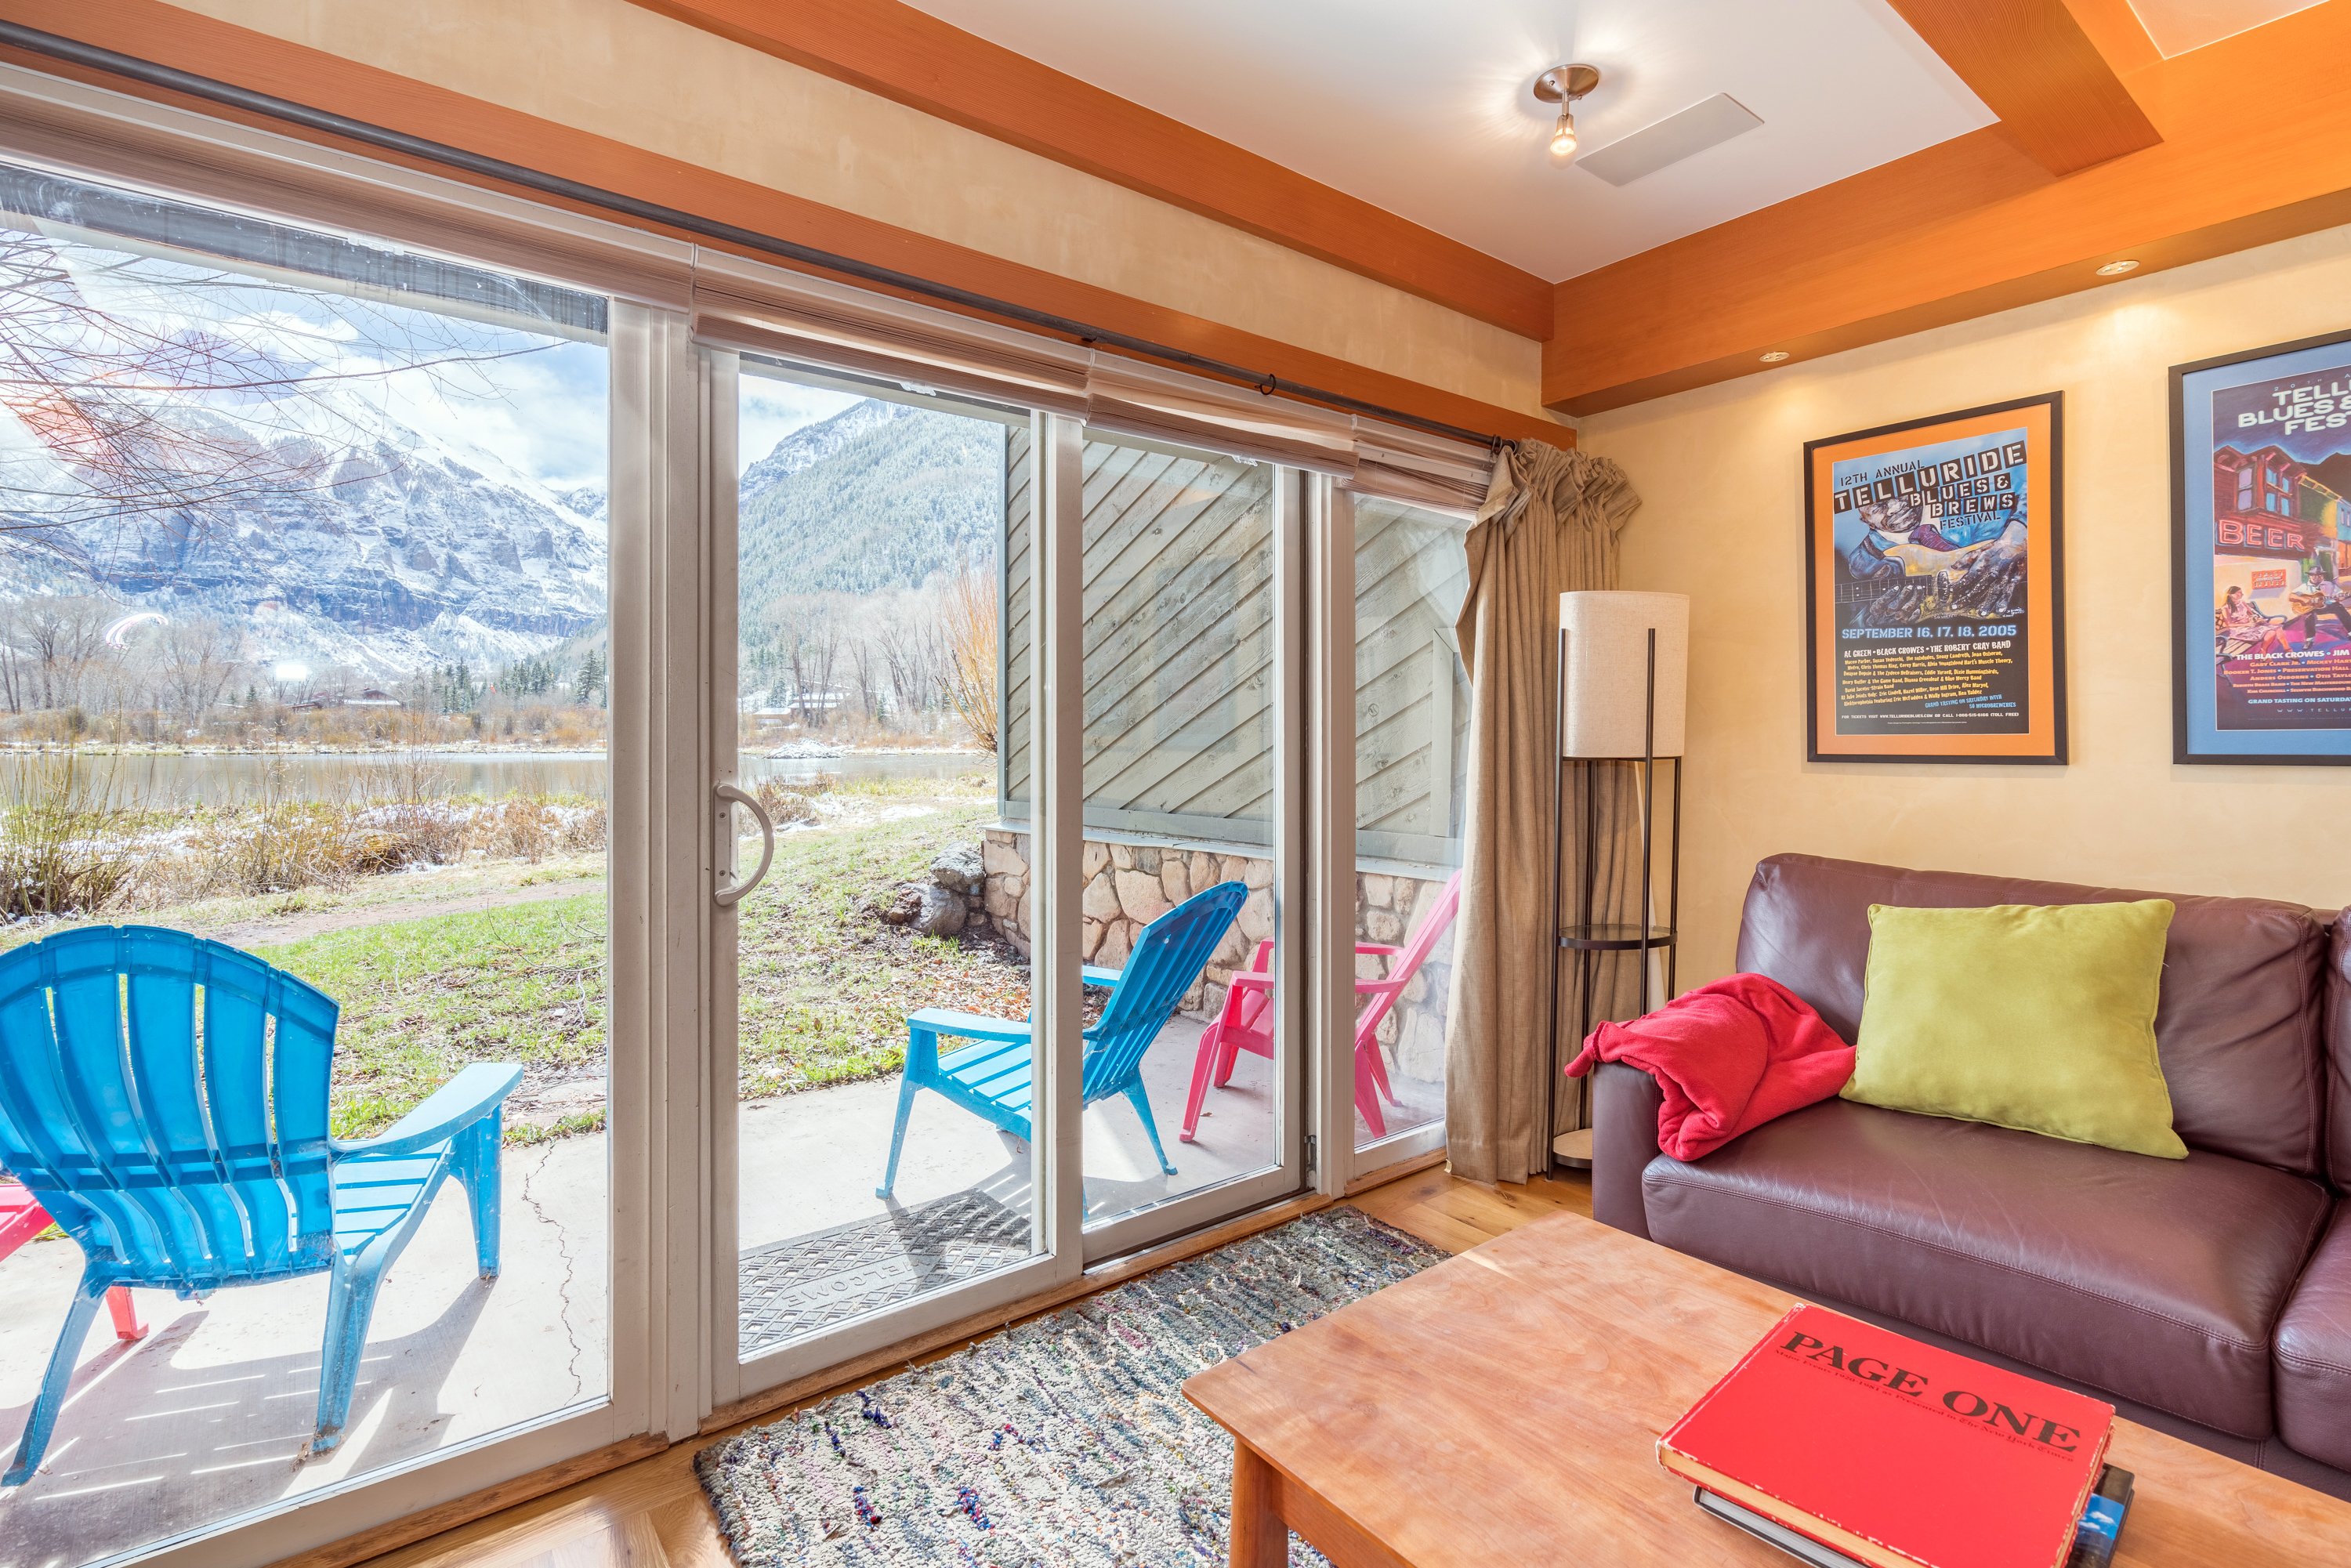 Sofa, Coffee Tabe and Sliding Doors to the Patio with Mountain Views